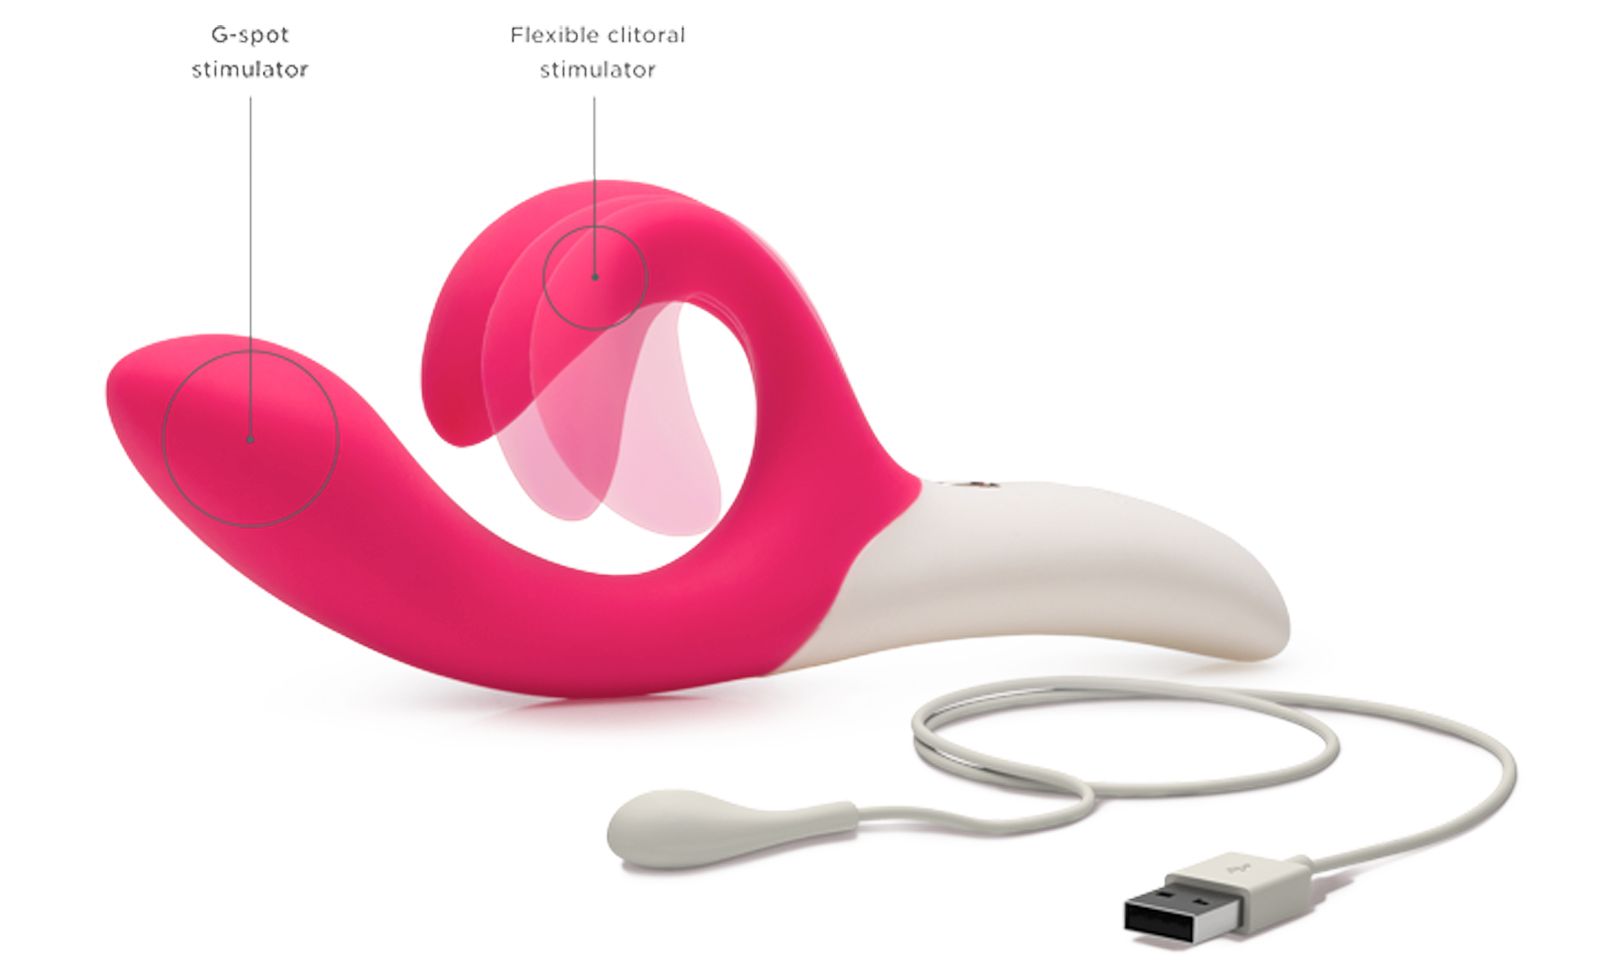 We-Vibe, Kiiroo Partner to Help Couples Connect in New Way